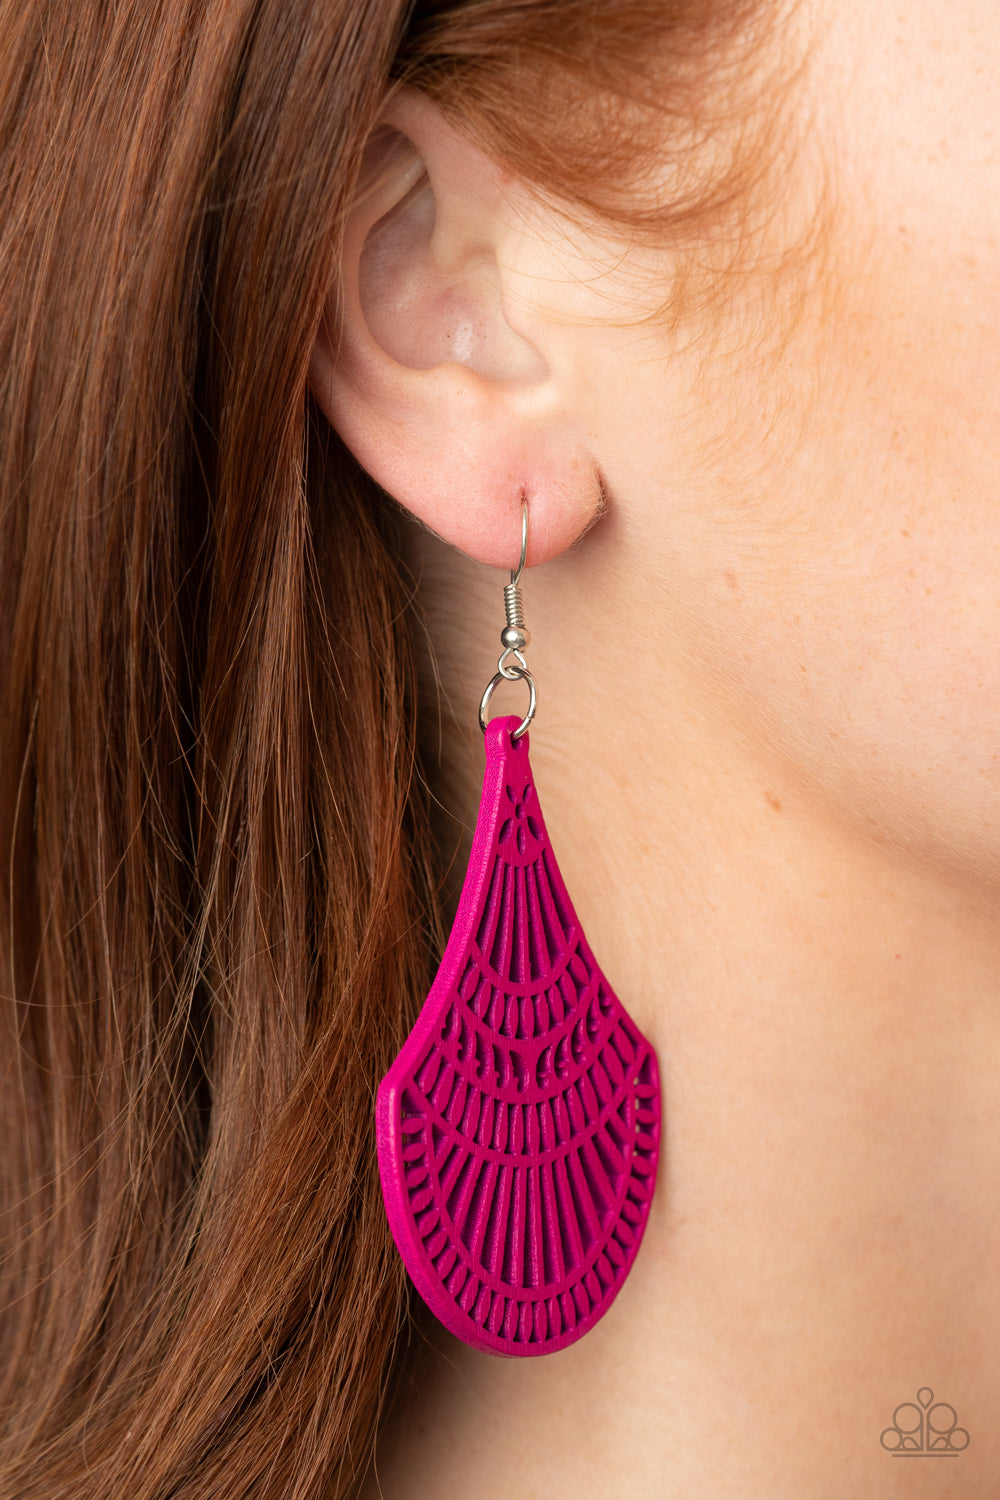 Tropical Tempest - Pink Wood Earrings - Princess Glam Shop